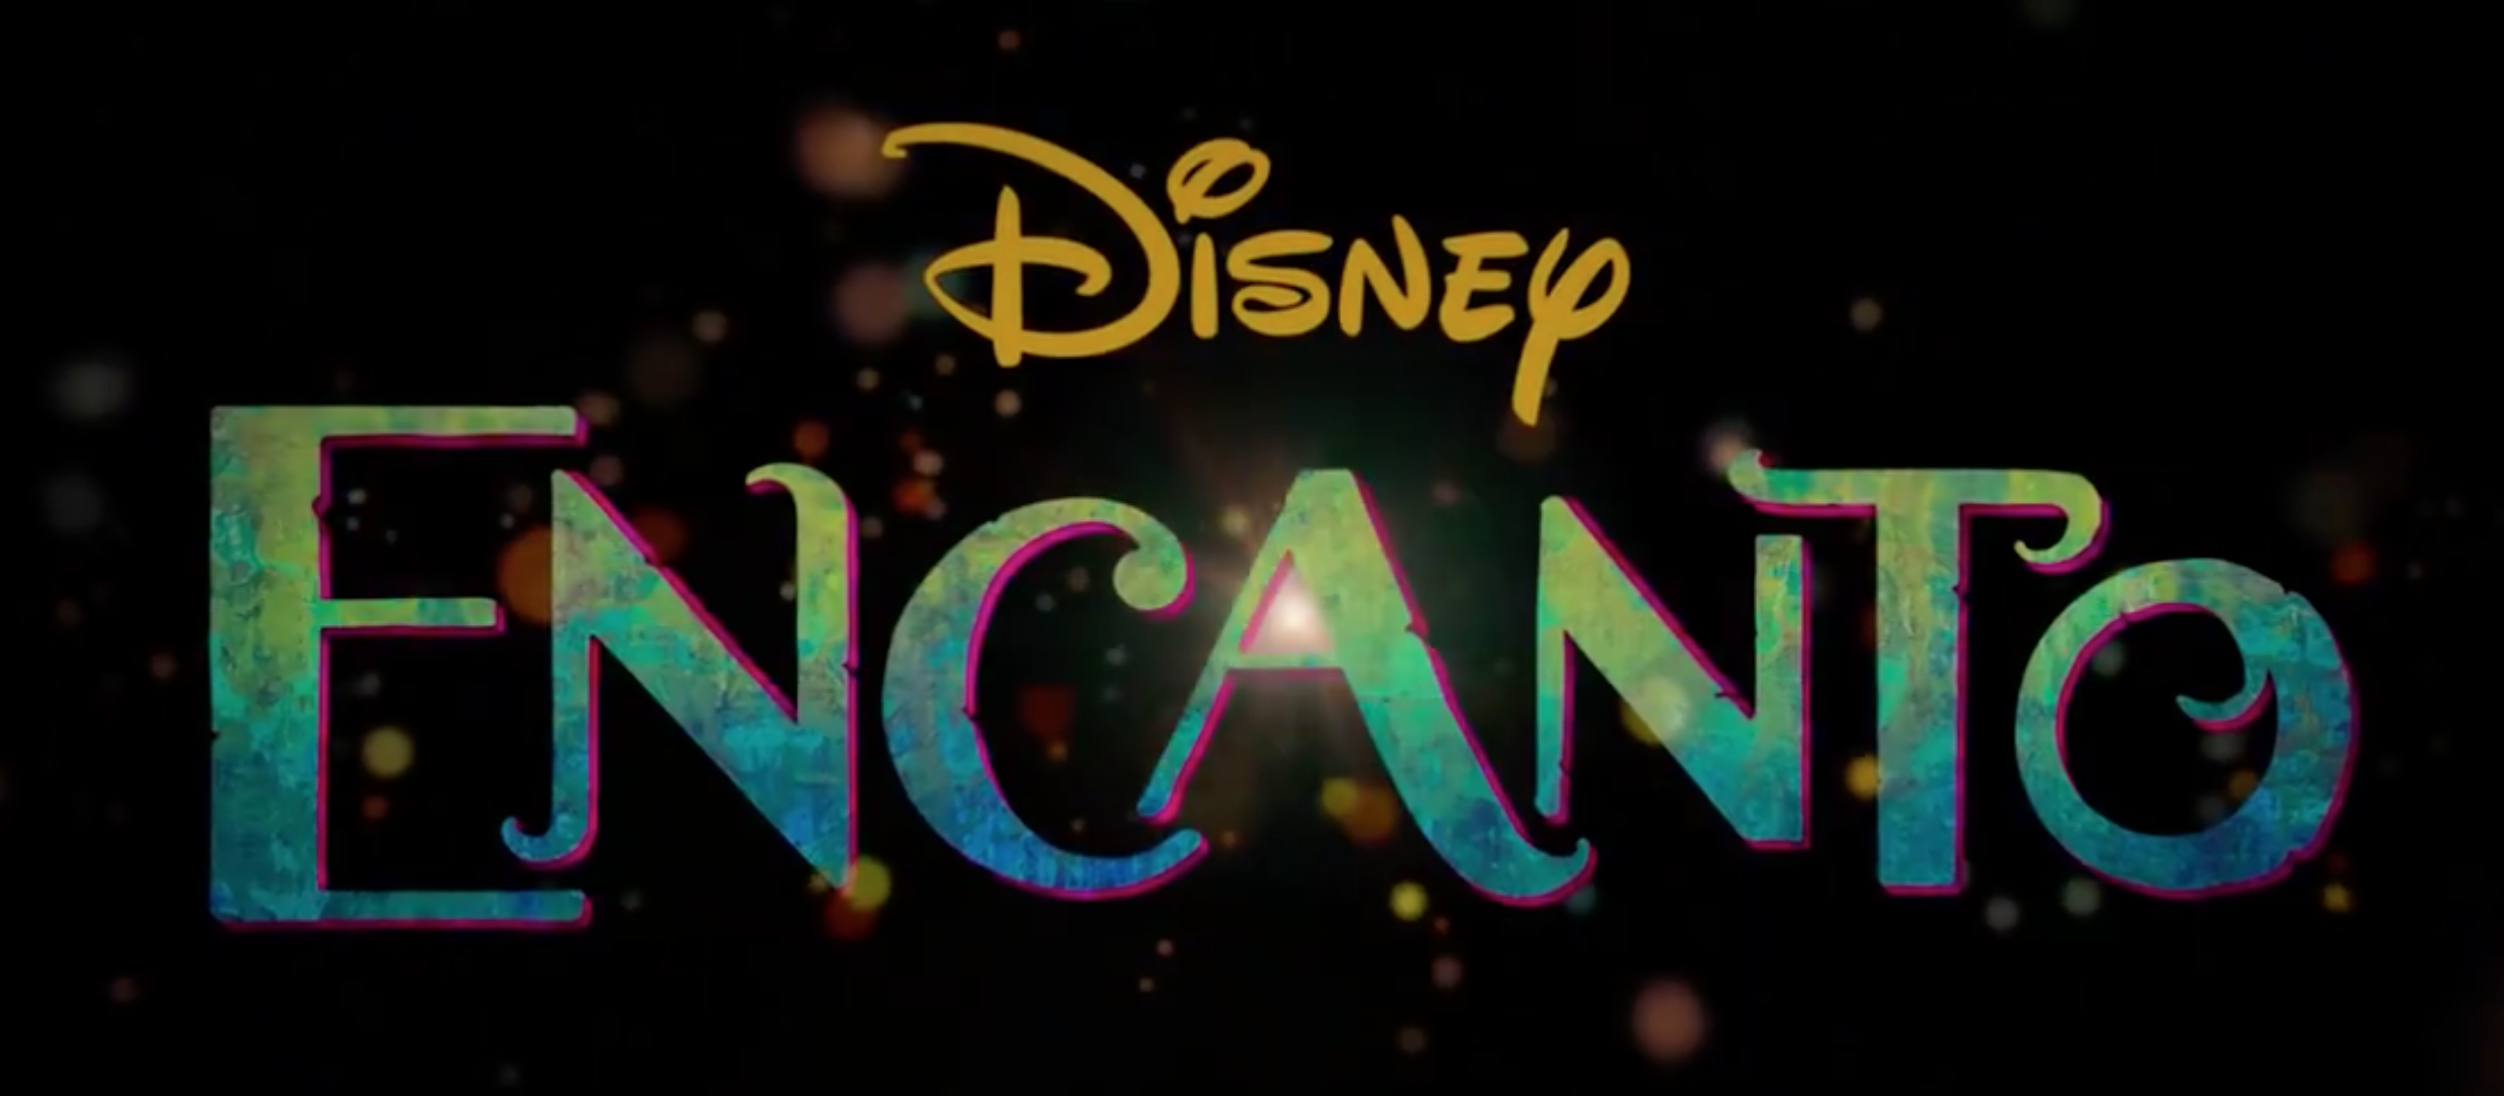 VIDEO: Watch the For Disney's 'Encanto!'